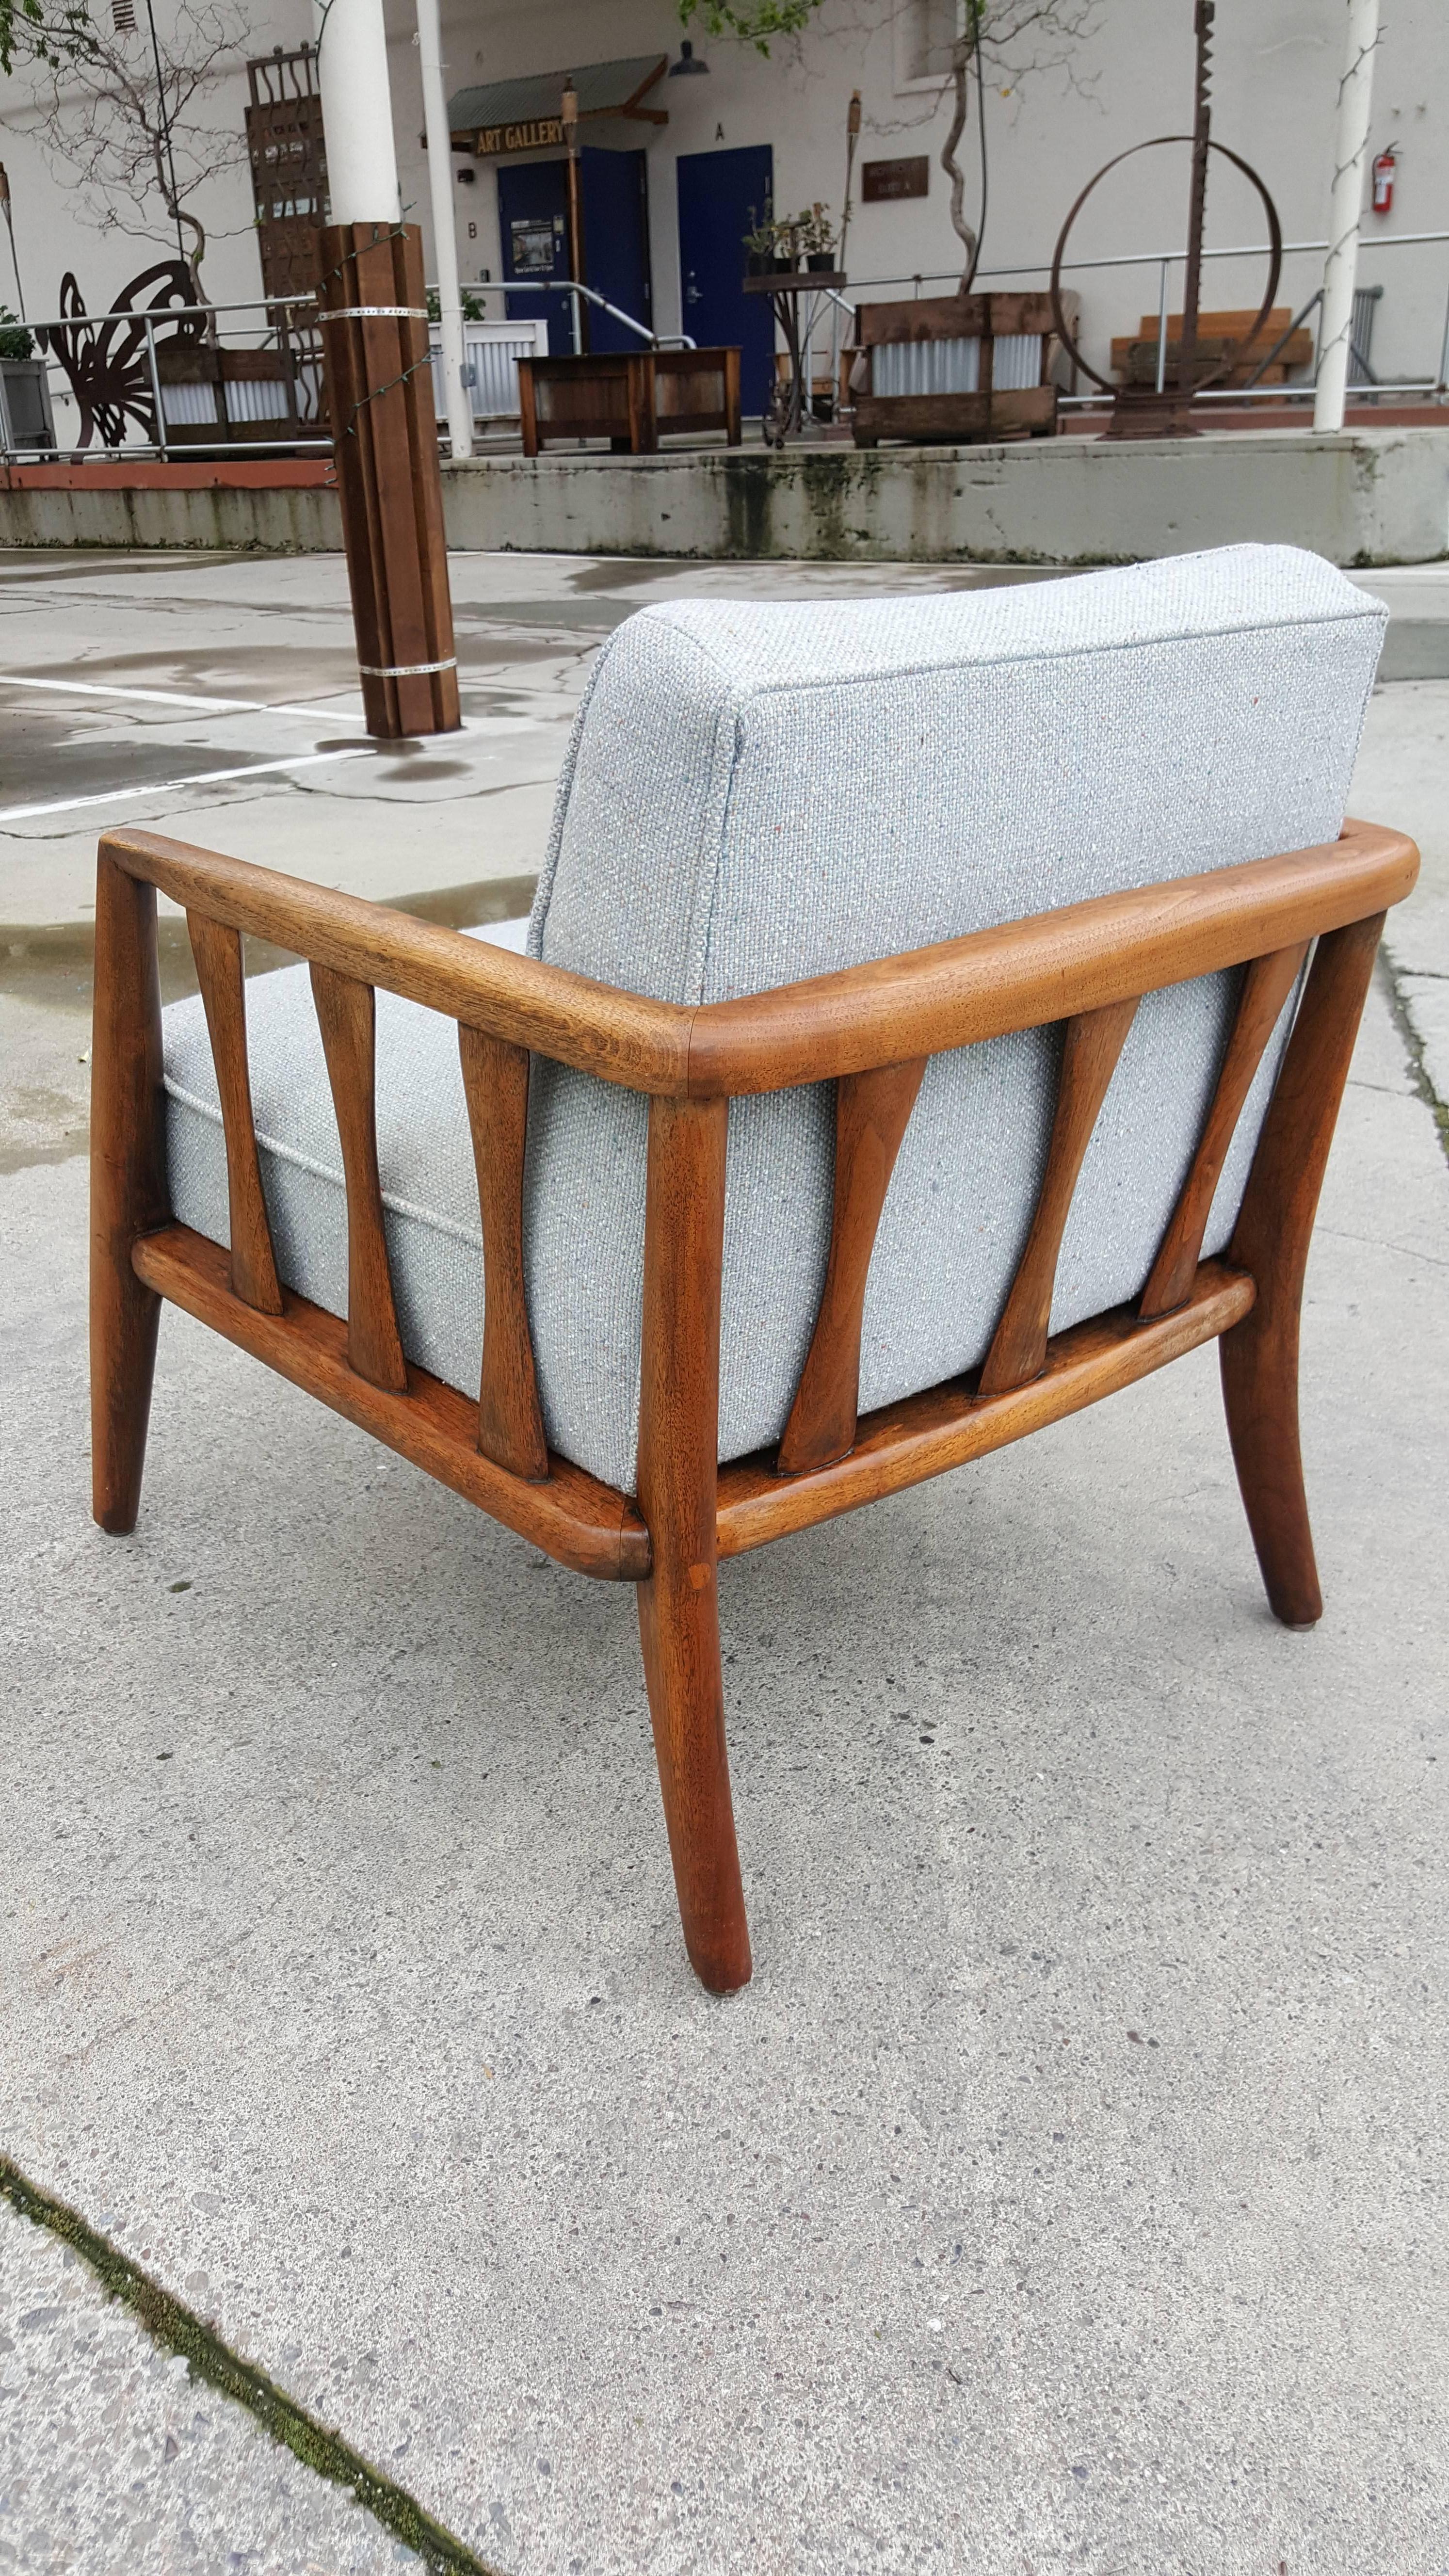 Fine craftsmanship and material in this Danish modern style solid walnut lounge chair. Notice sculpted walnut hourglass slats at sides and wrapped chair frame in the style of Folke Ohlsson.